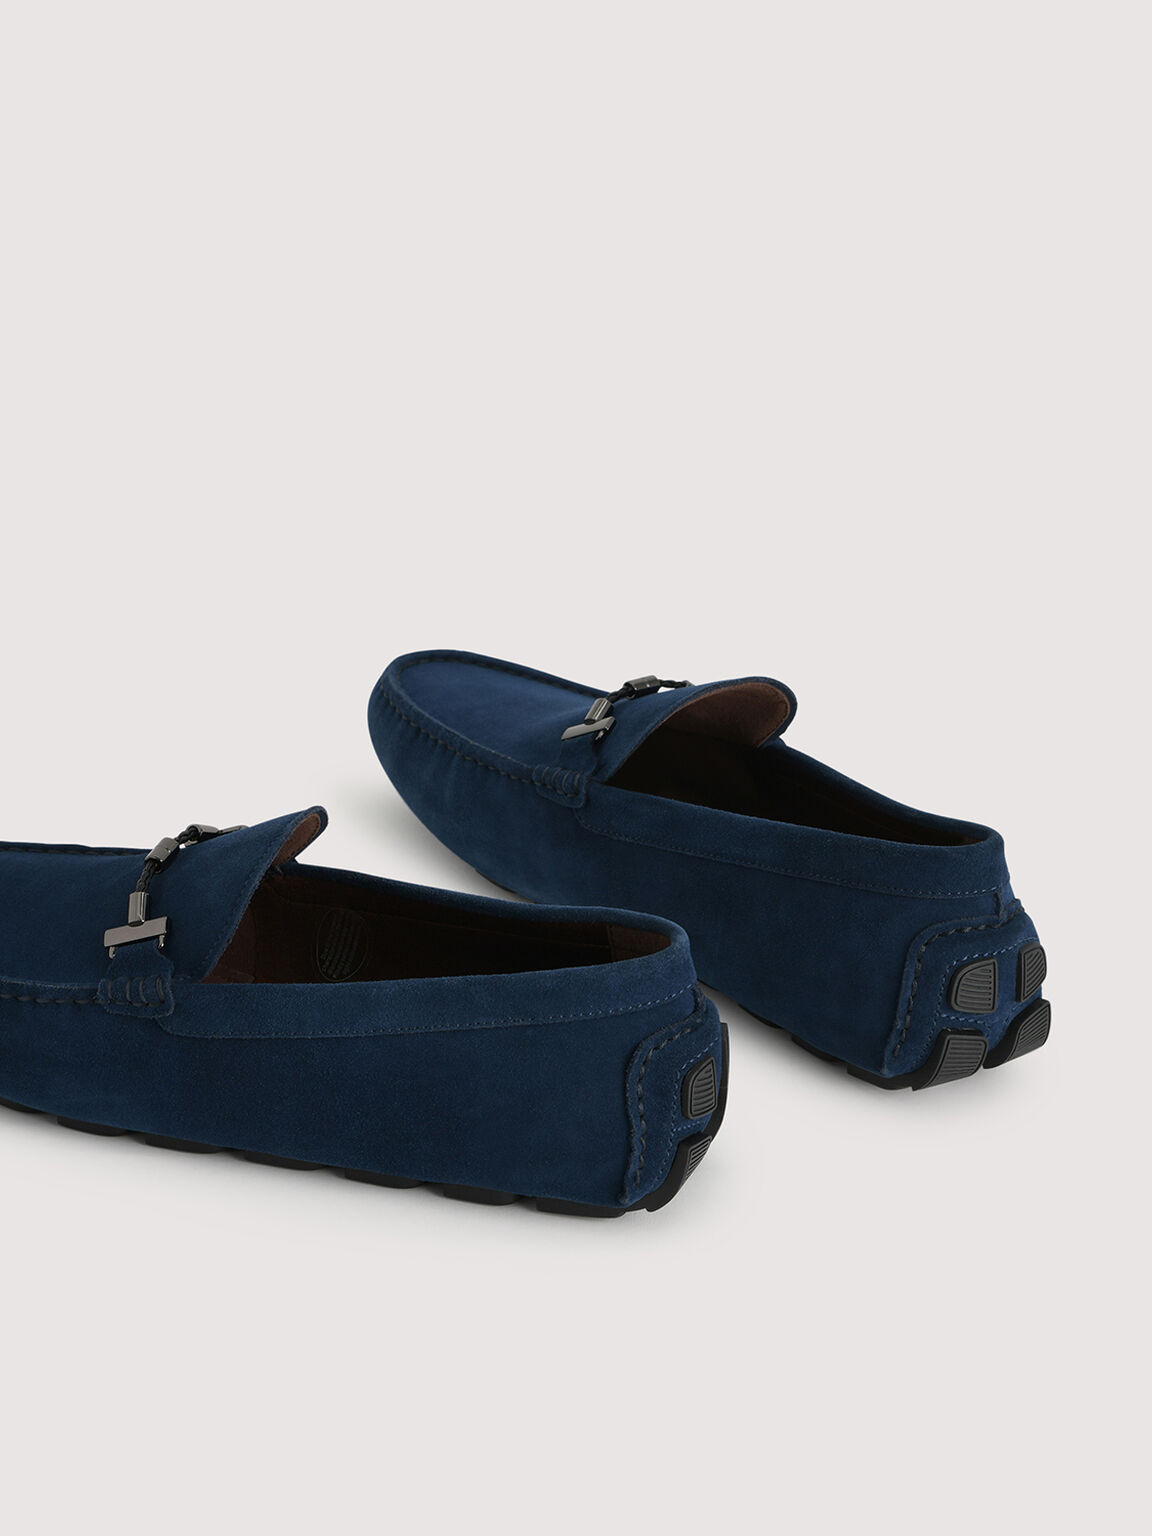 Calf Suede Loafers, Navy